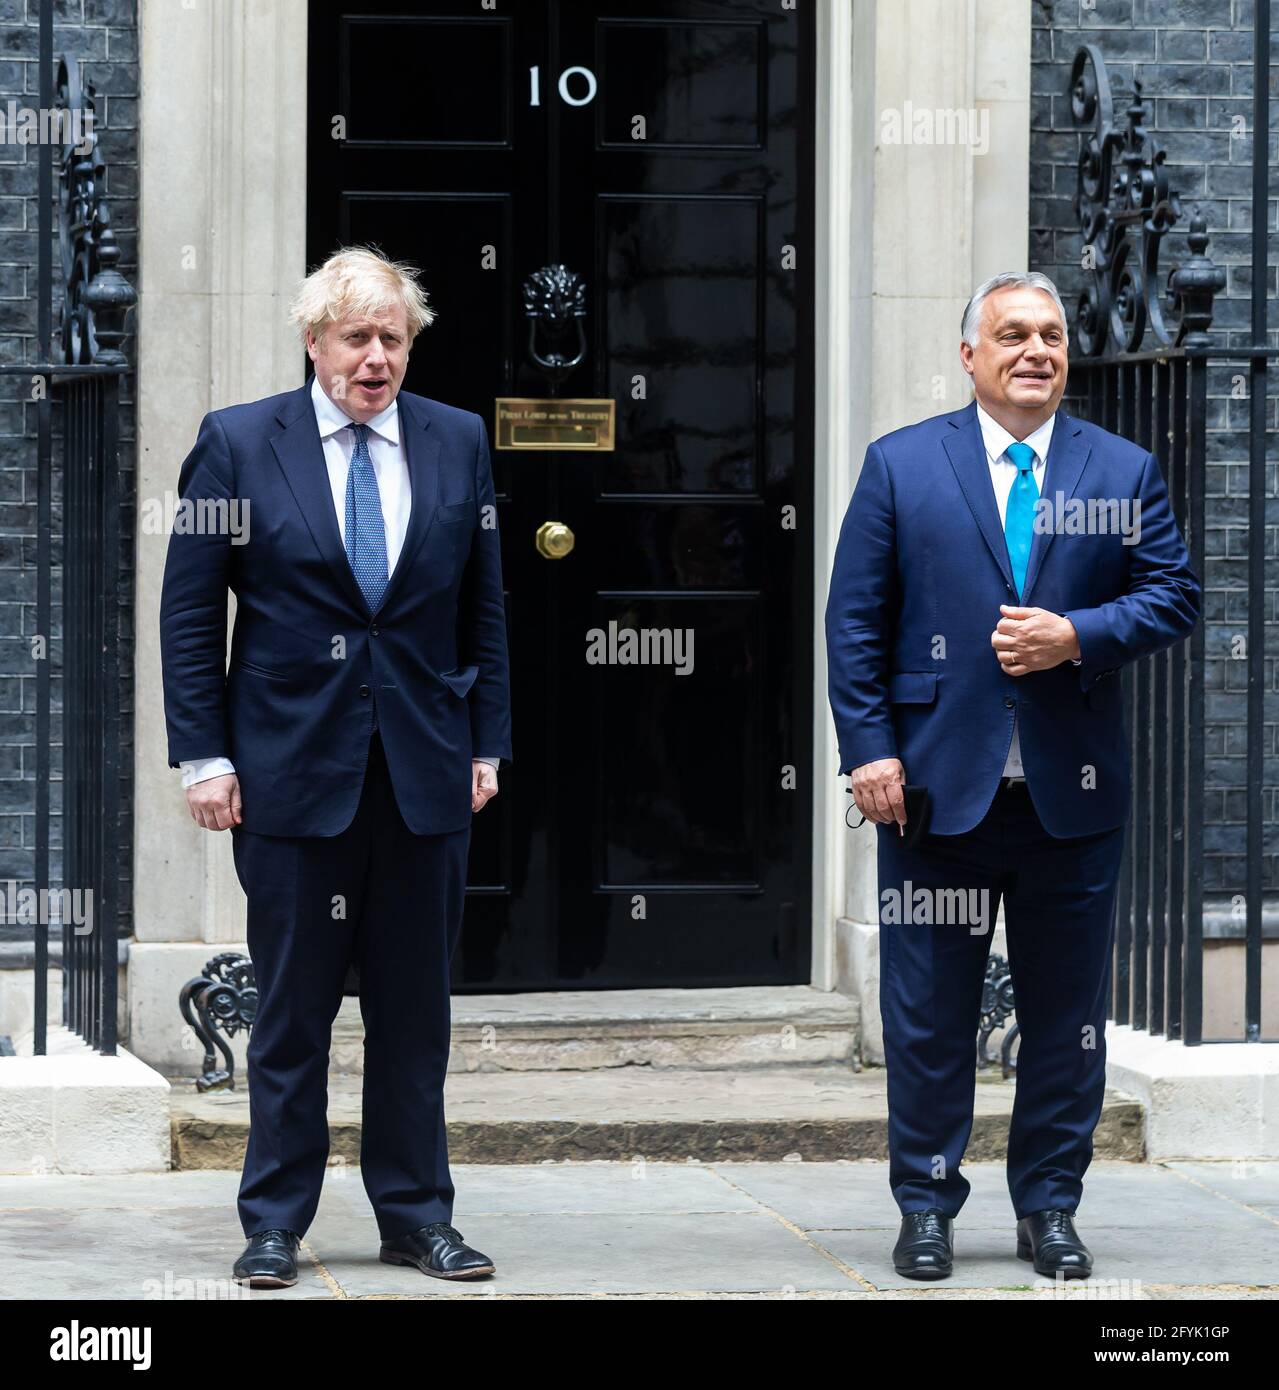 LONDON, UK. MAY 28TH. Viktor Orbán the Hungarian Prime Minister is greeted by British Prime Minister Boris Johnson visits Downing Street, London on Friday 28th May 2021. (Credit: Tejas Sandhu | MI News) Credit: MI News & Sport /Alamy Live News Stock Photo